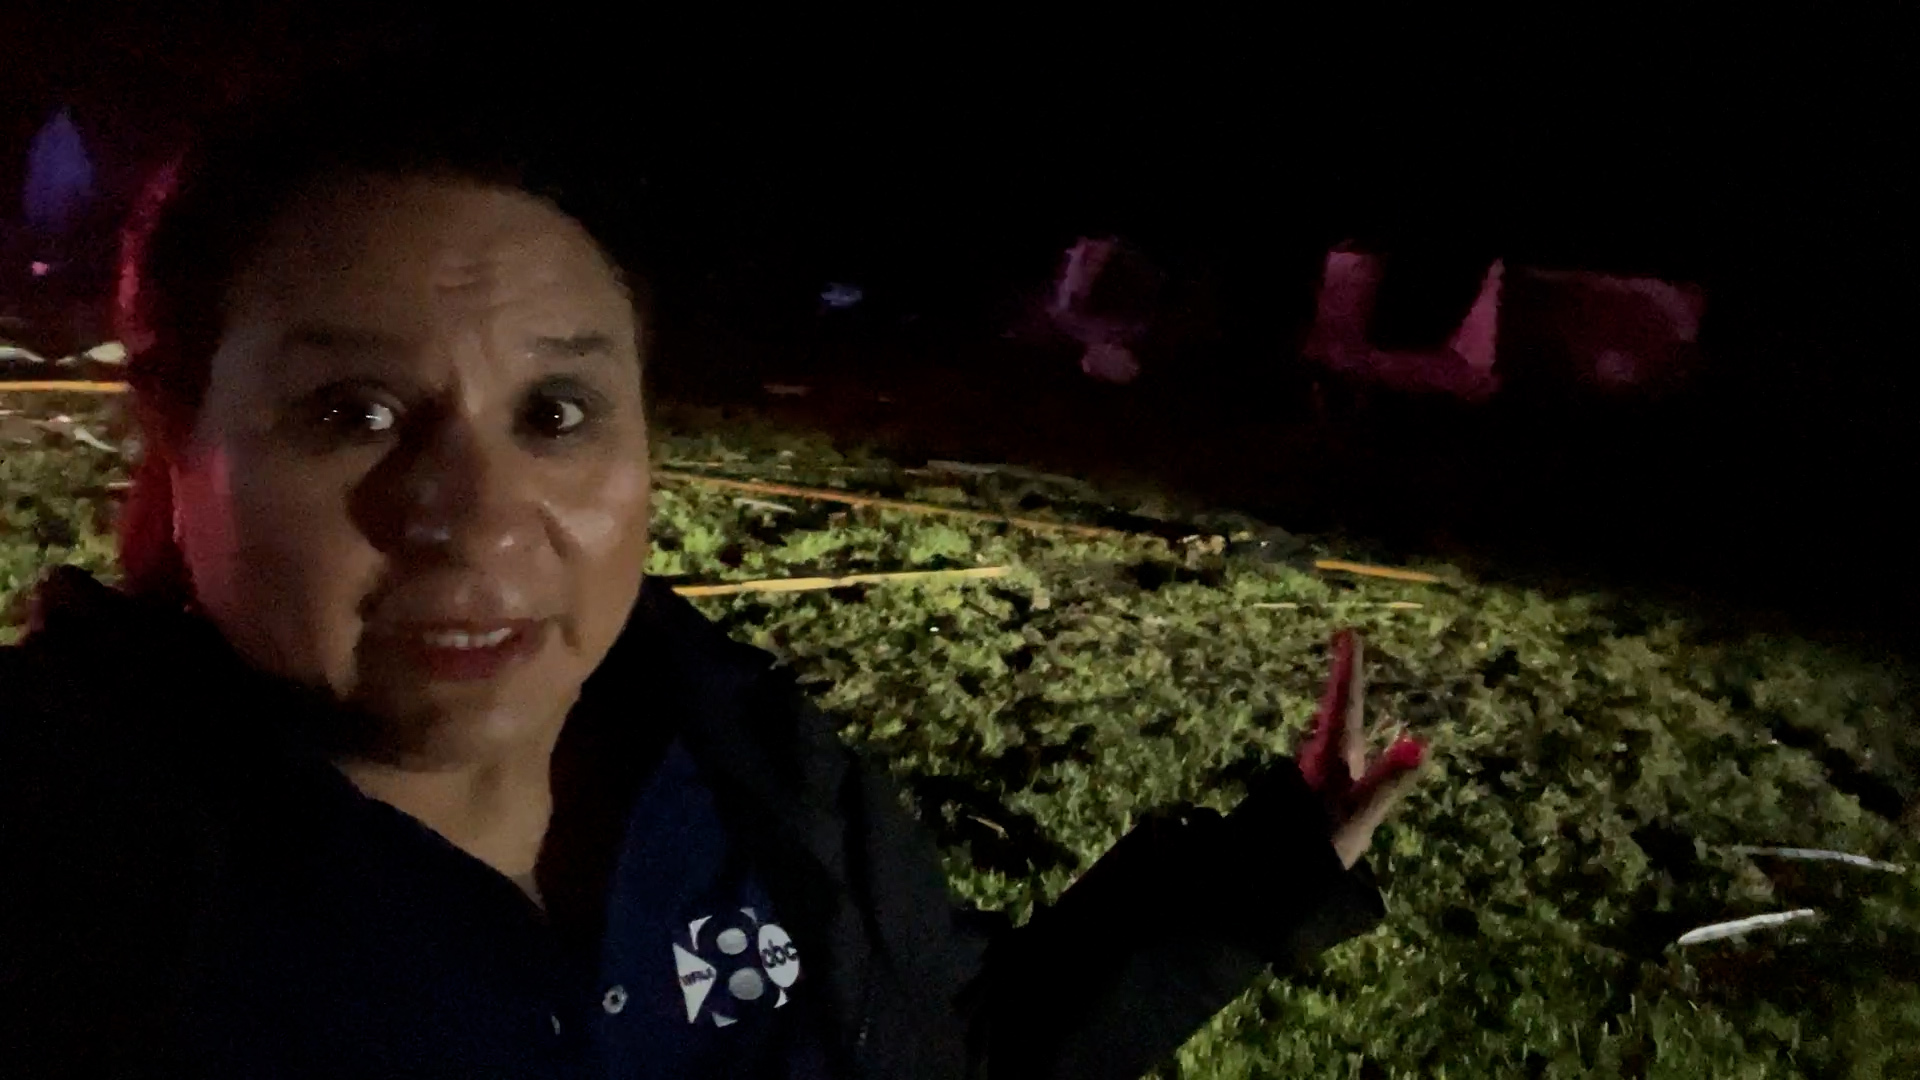 WFAA's Rebecca Lopez spoke to a homeowner in Celina, Texas, whose house was one of many ravaged by a reported tornado on Saturday night.